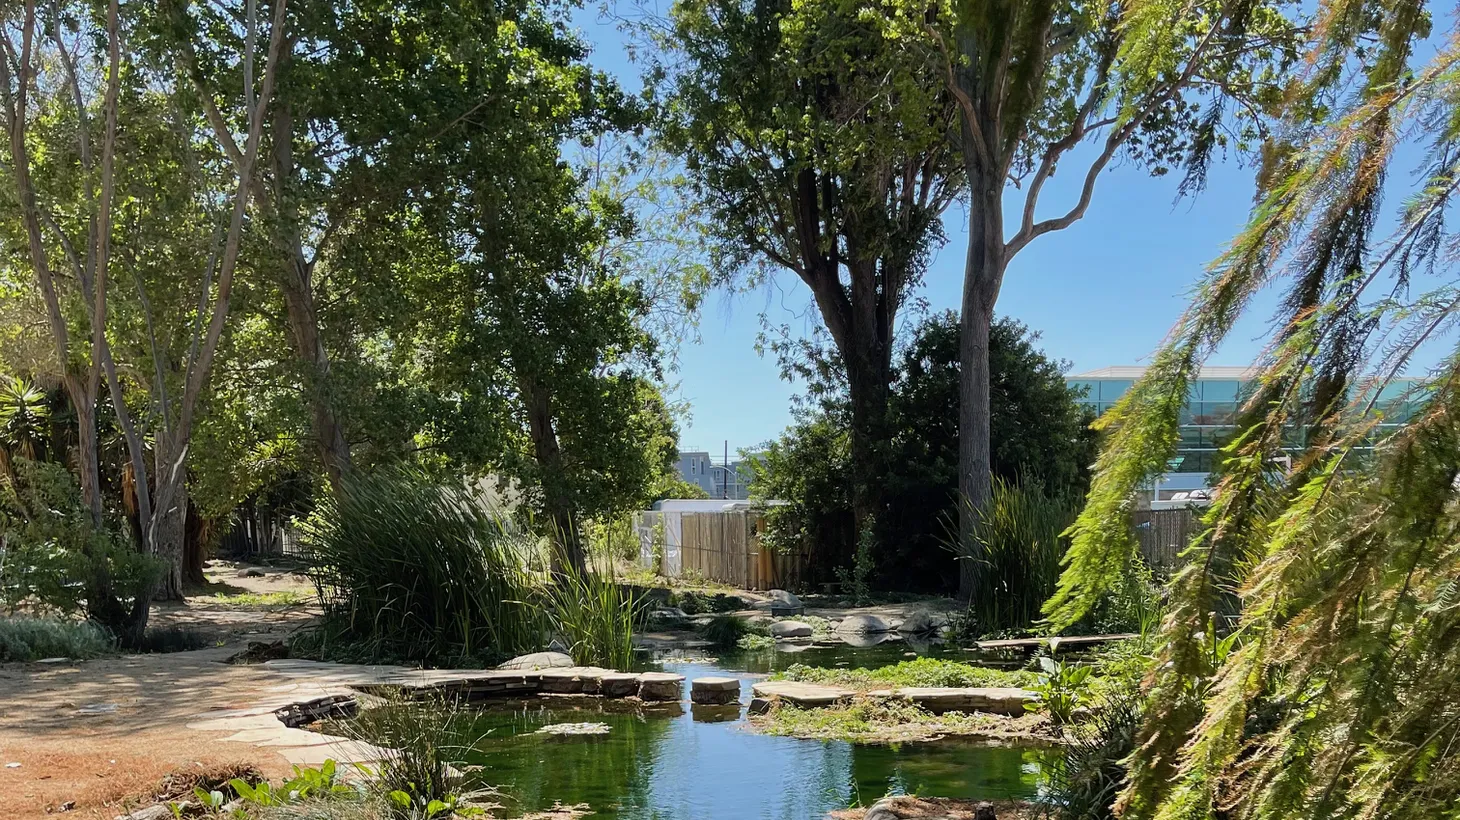 Natural spring water feeds this pond at the Gabrielino/Tongva Sacred Springs Foundation in West LA. It’s on the site of an ancient indigenous village called Kuruvungna.